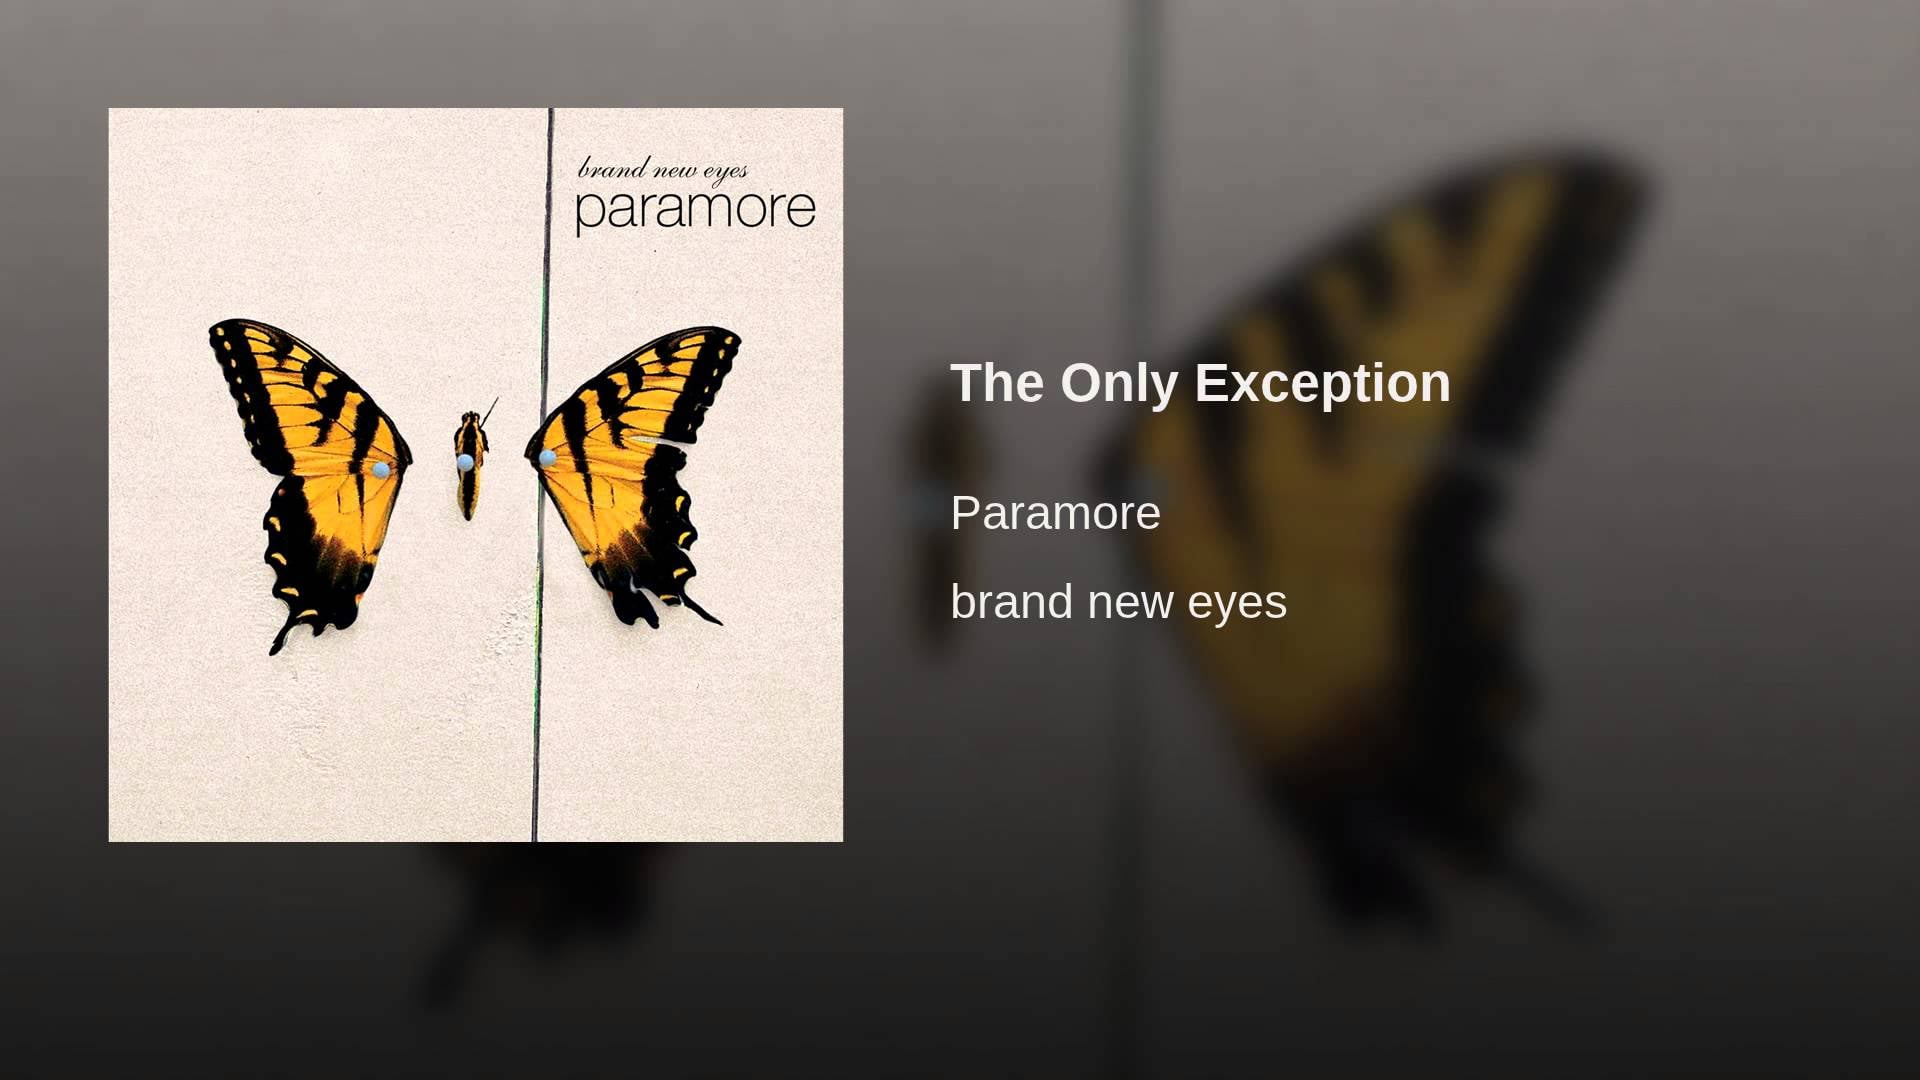 The only exception